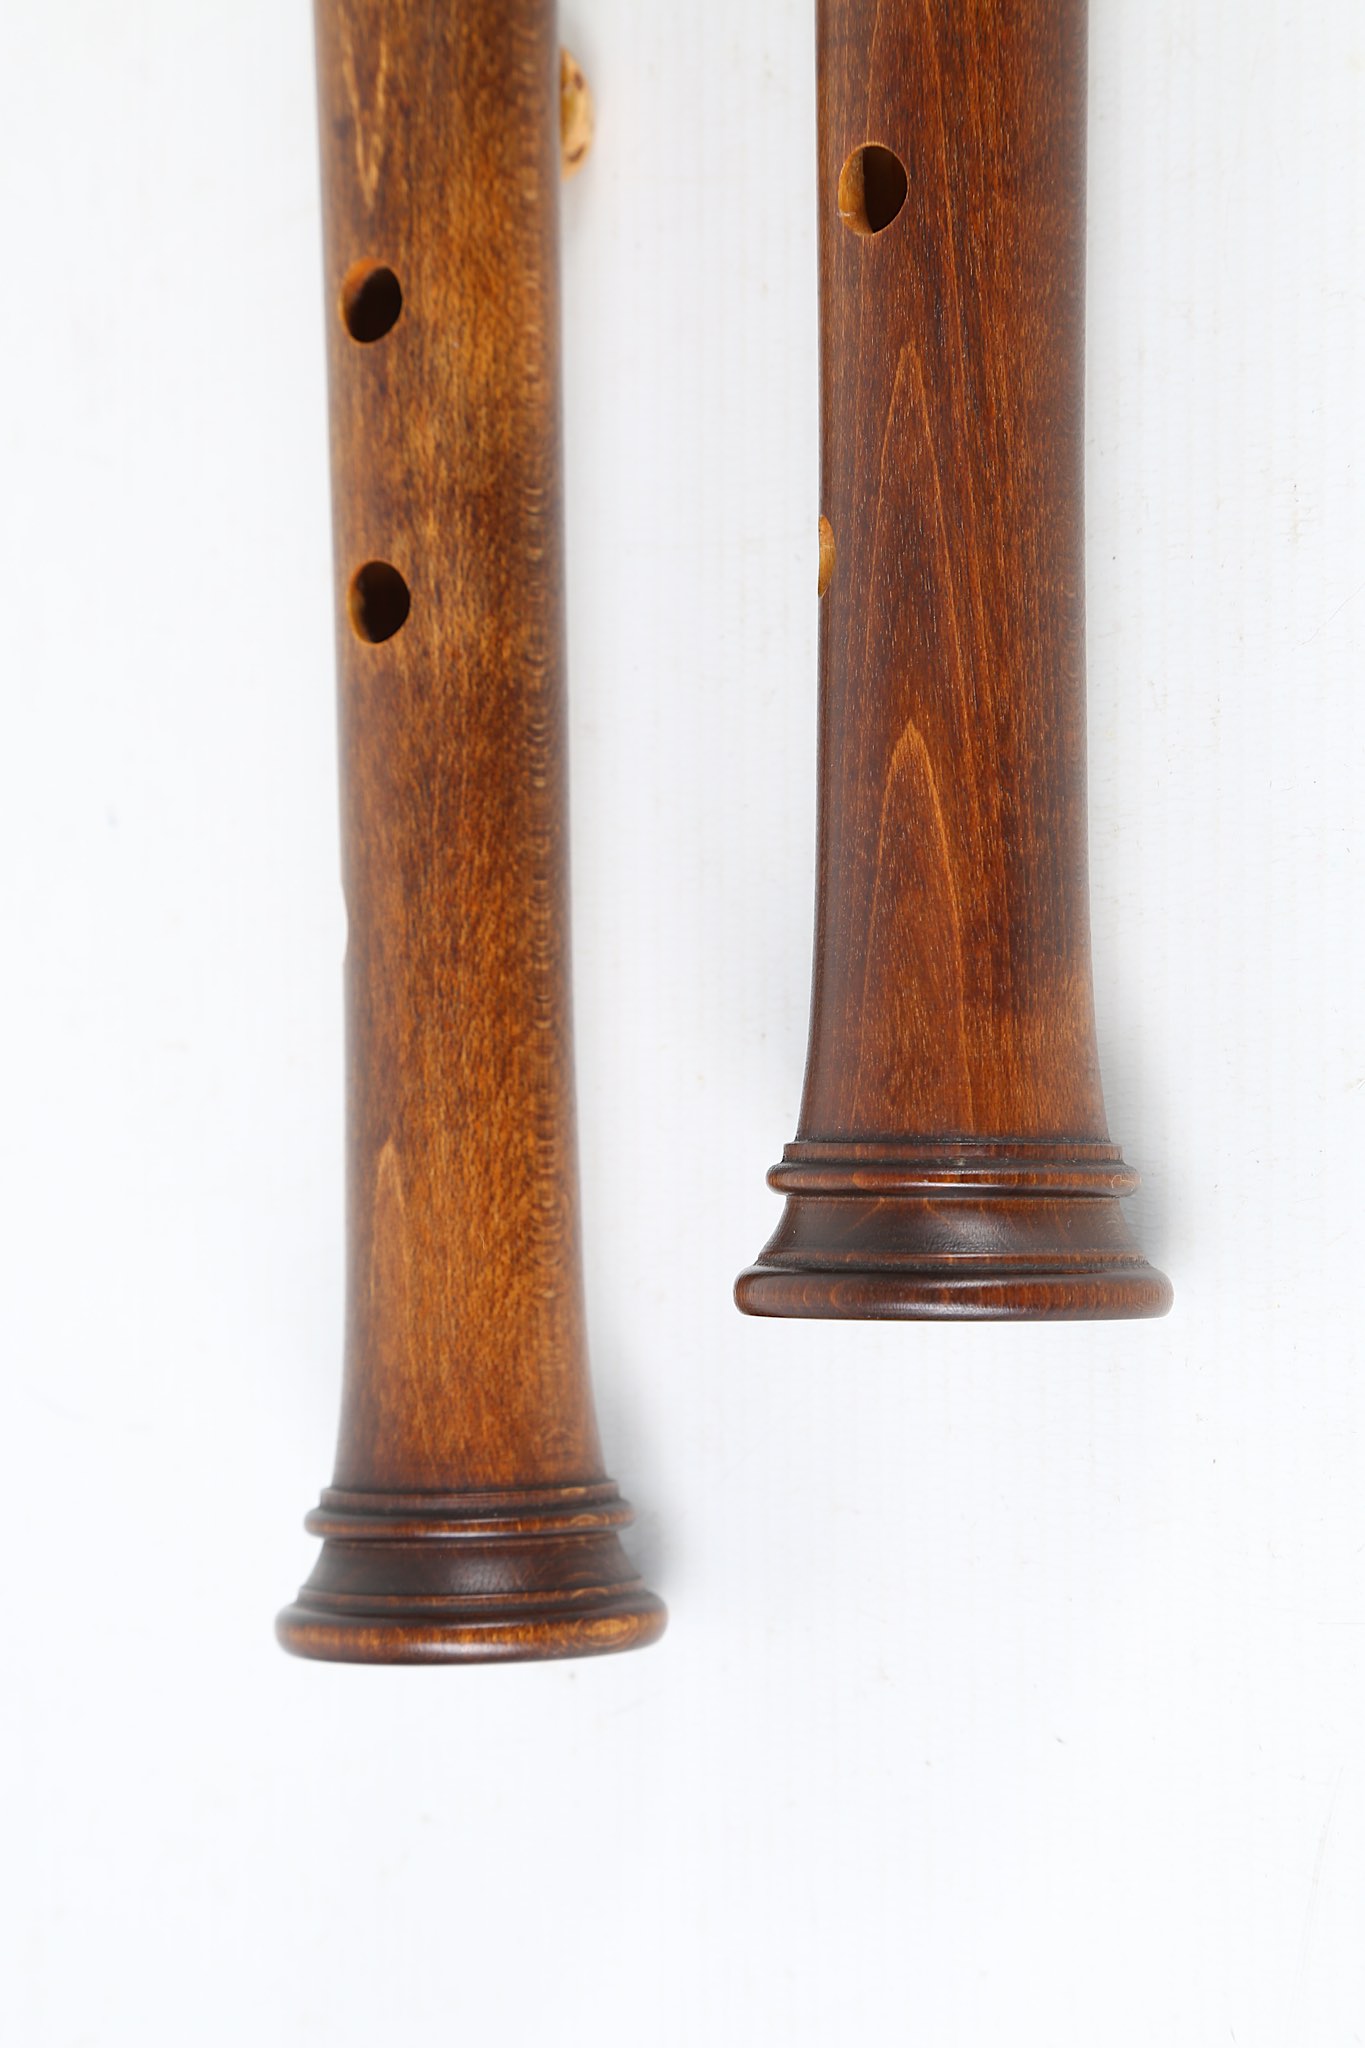 Two Praetorius trebles. Both are made out of maple, stained in brown colour. In very good condition. - Image 4 of 4